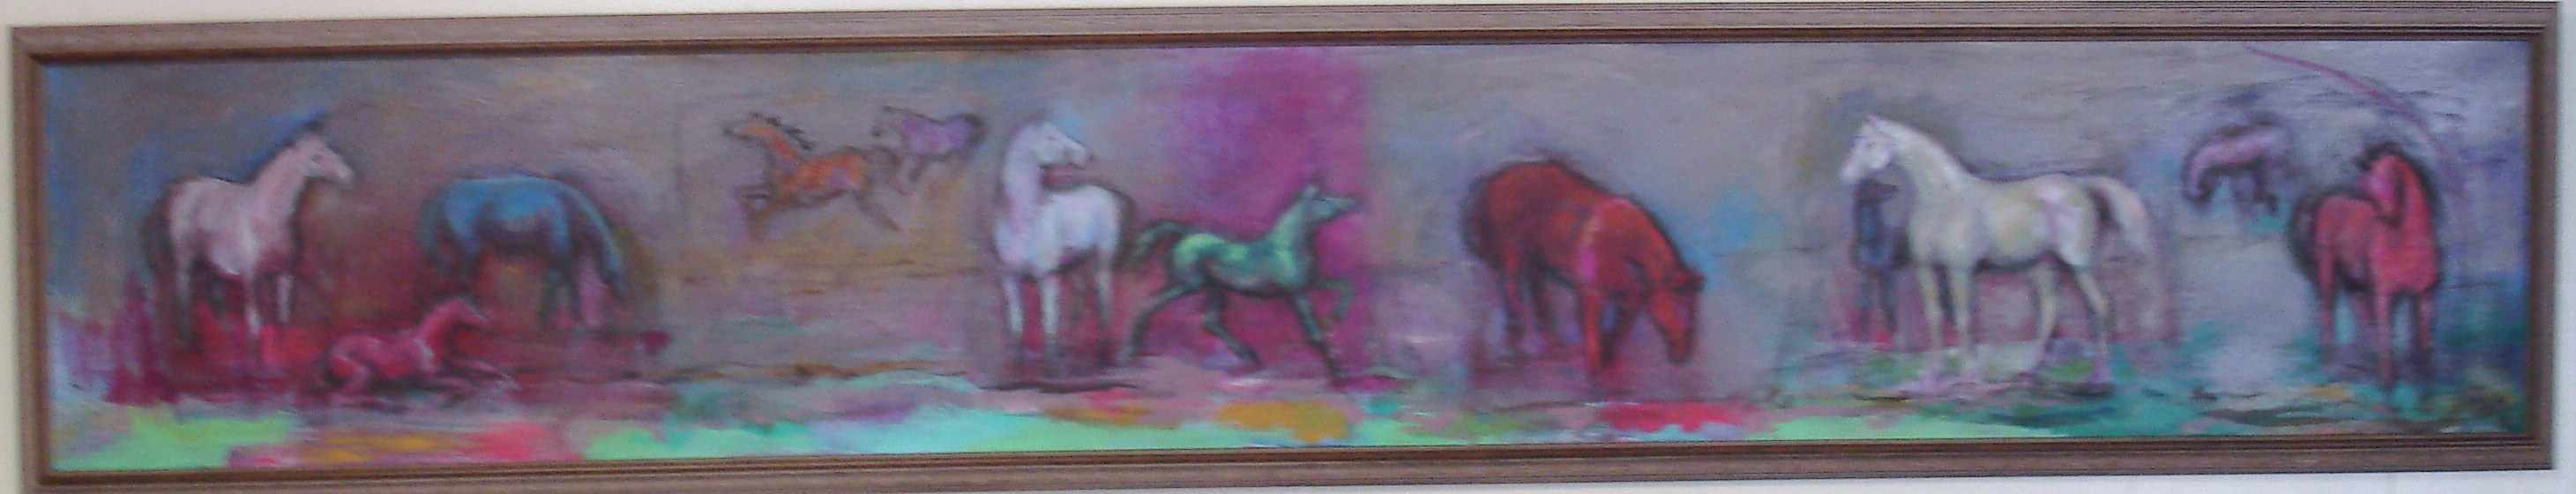 12 Horses - painting